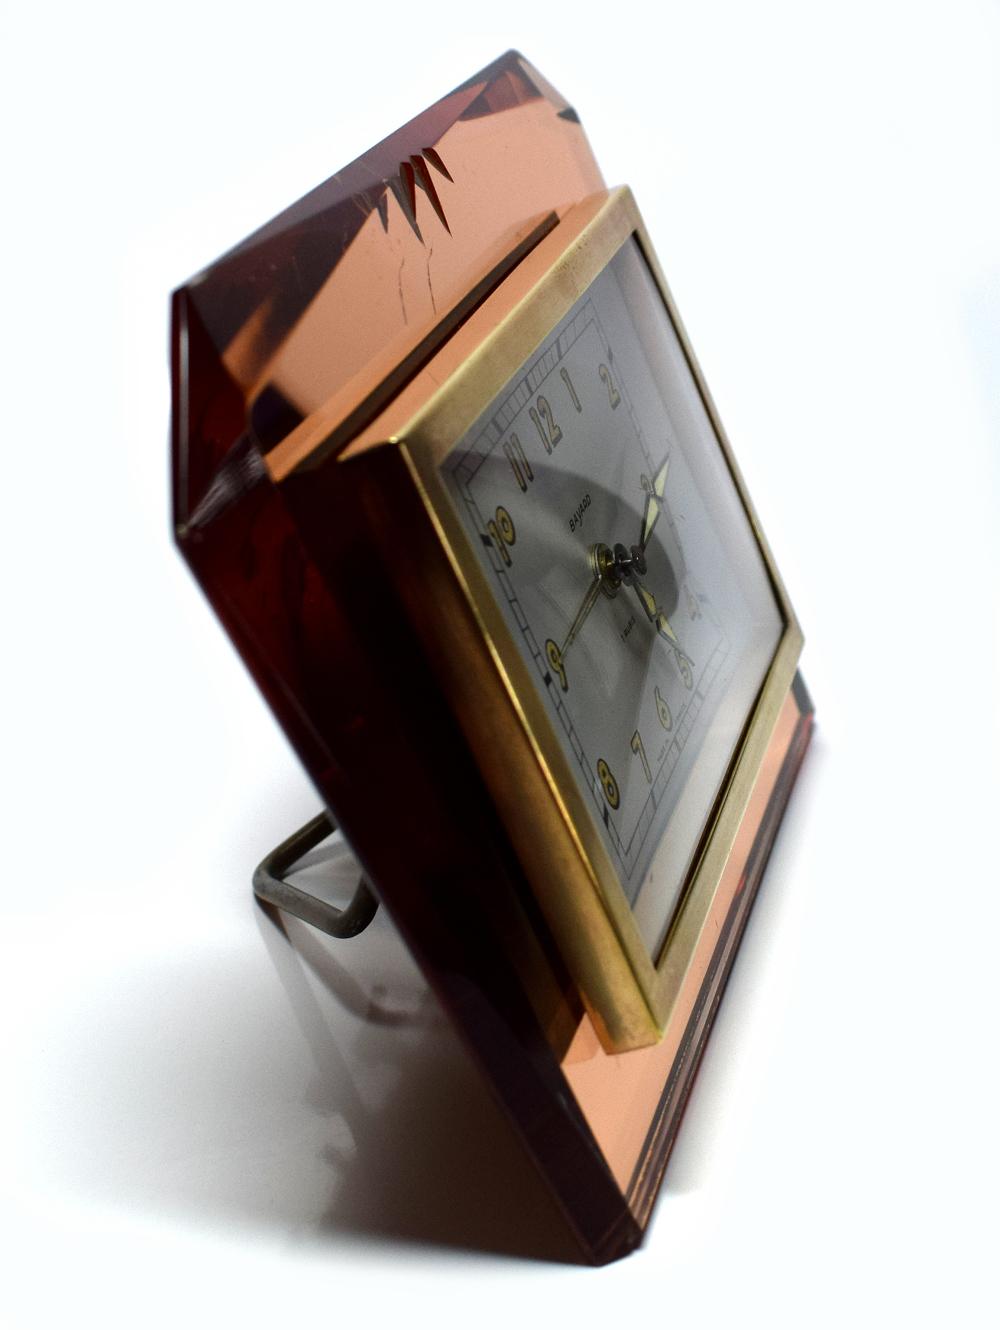 Etched French Free Standing 1930s Art Deco Mirror Clock